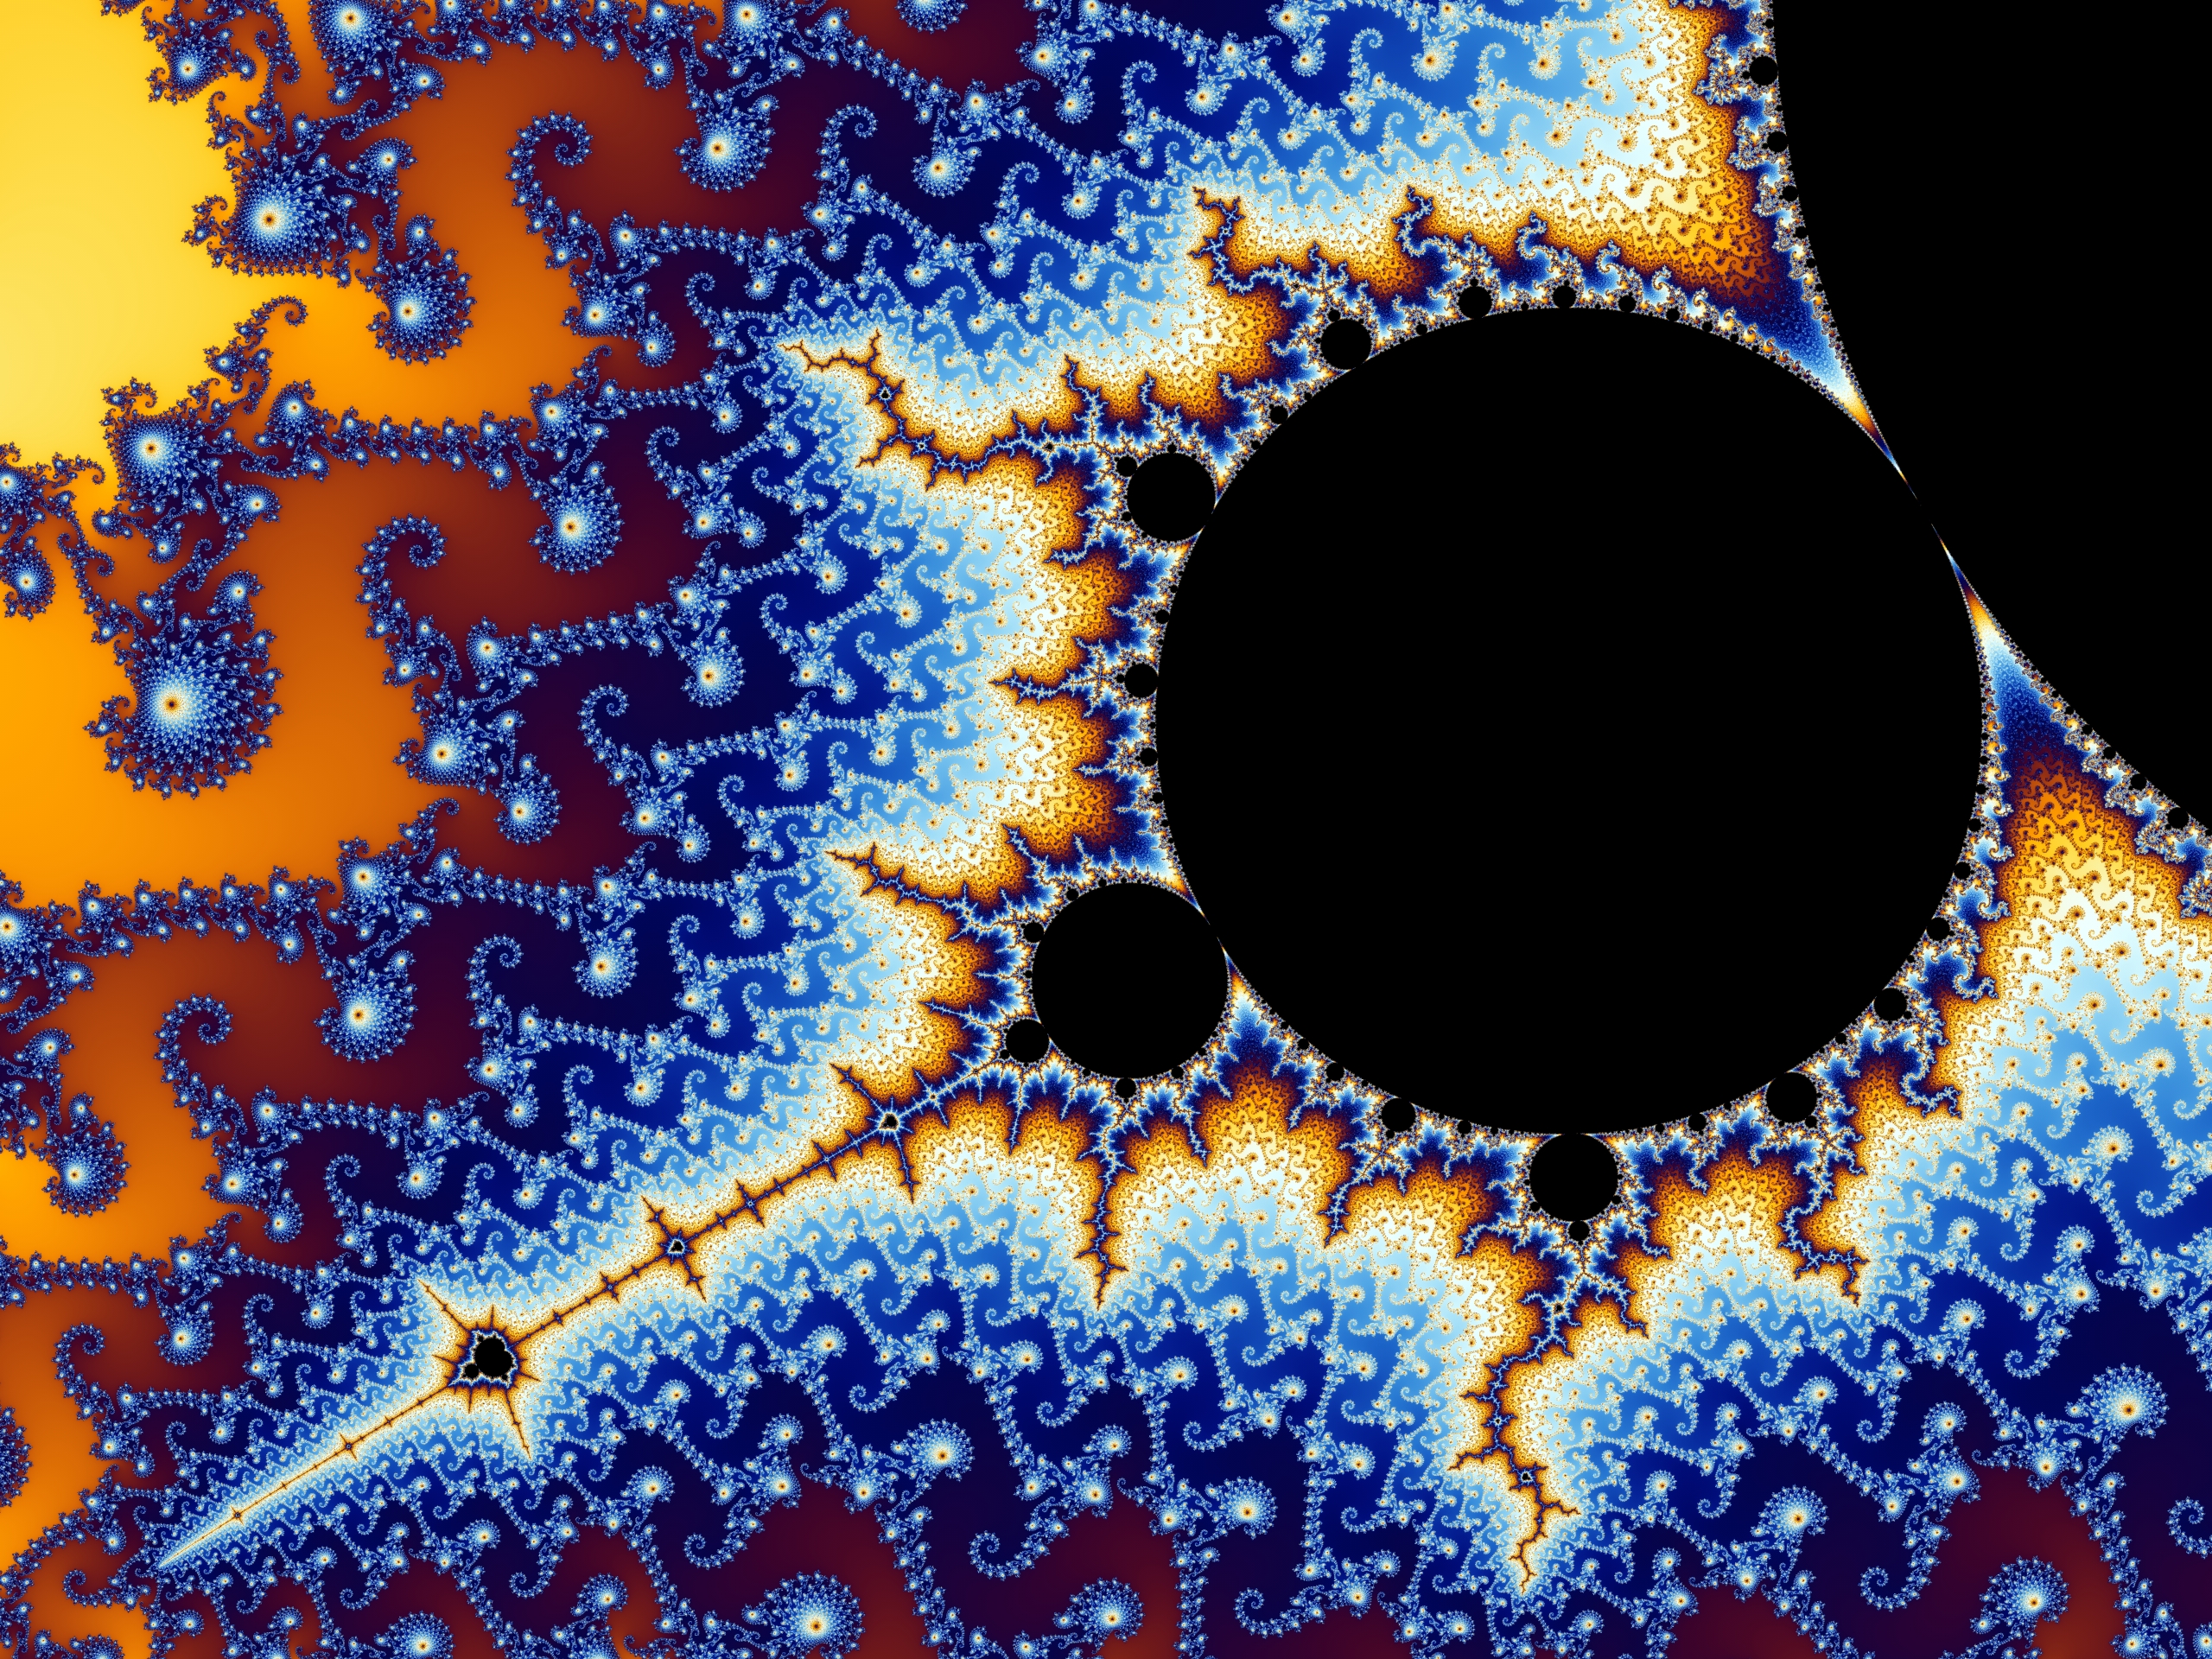 Onceagain limitless more Mandelbrots can be found along the boundaries